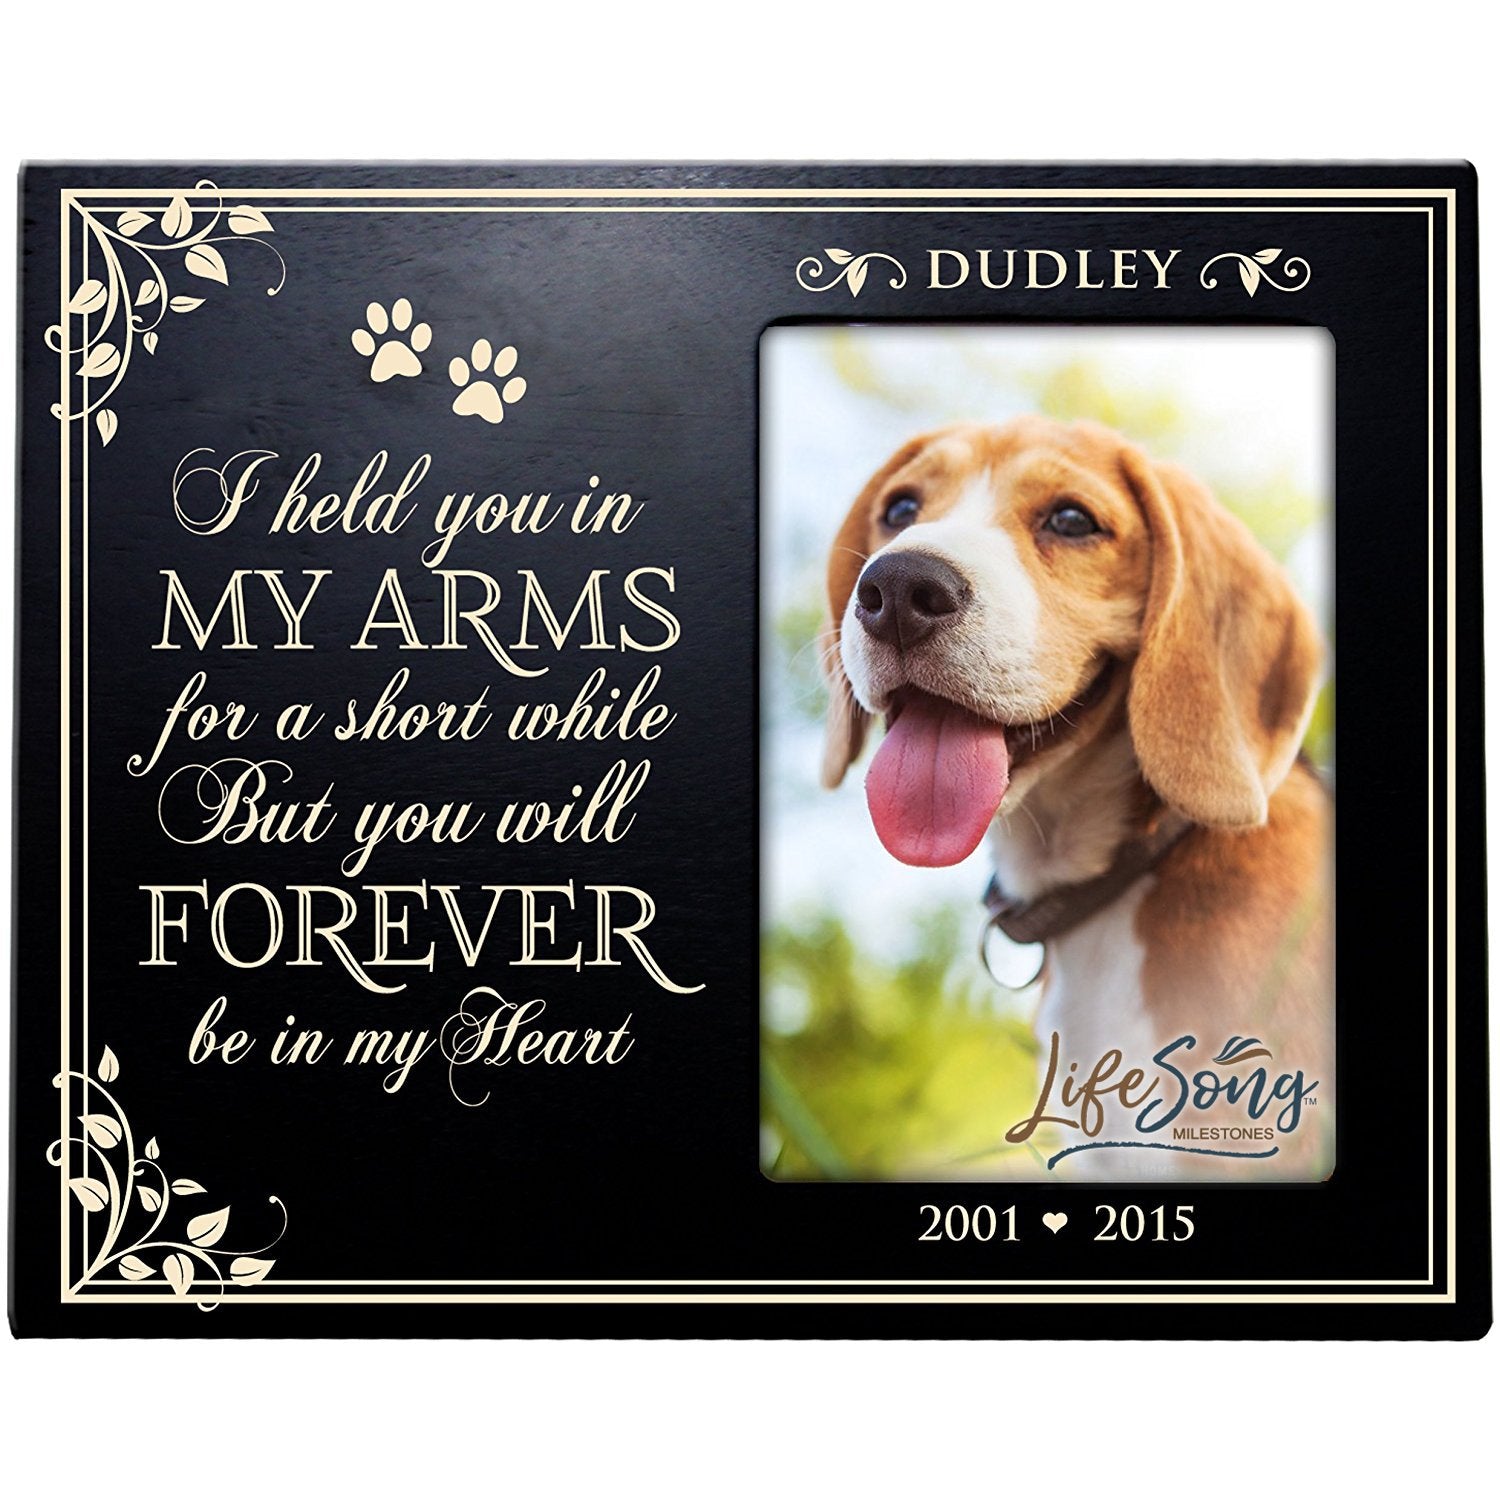 8x10 Black Pet Memorial Picture Frame with the phrase "I Held You In My Arms"